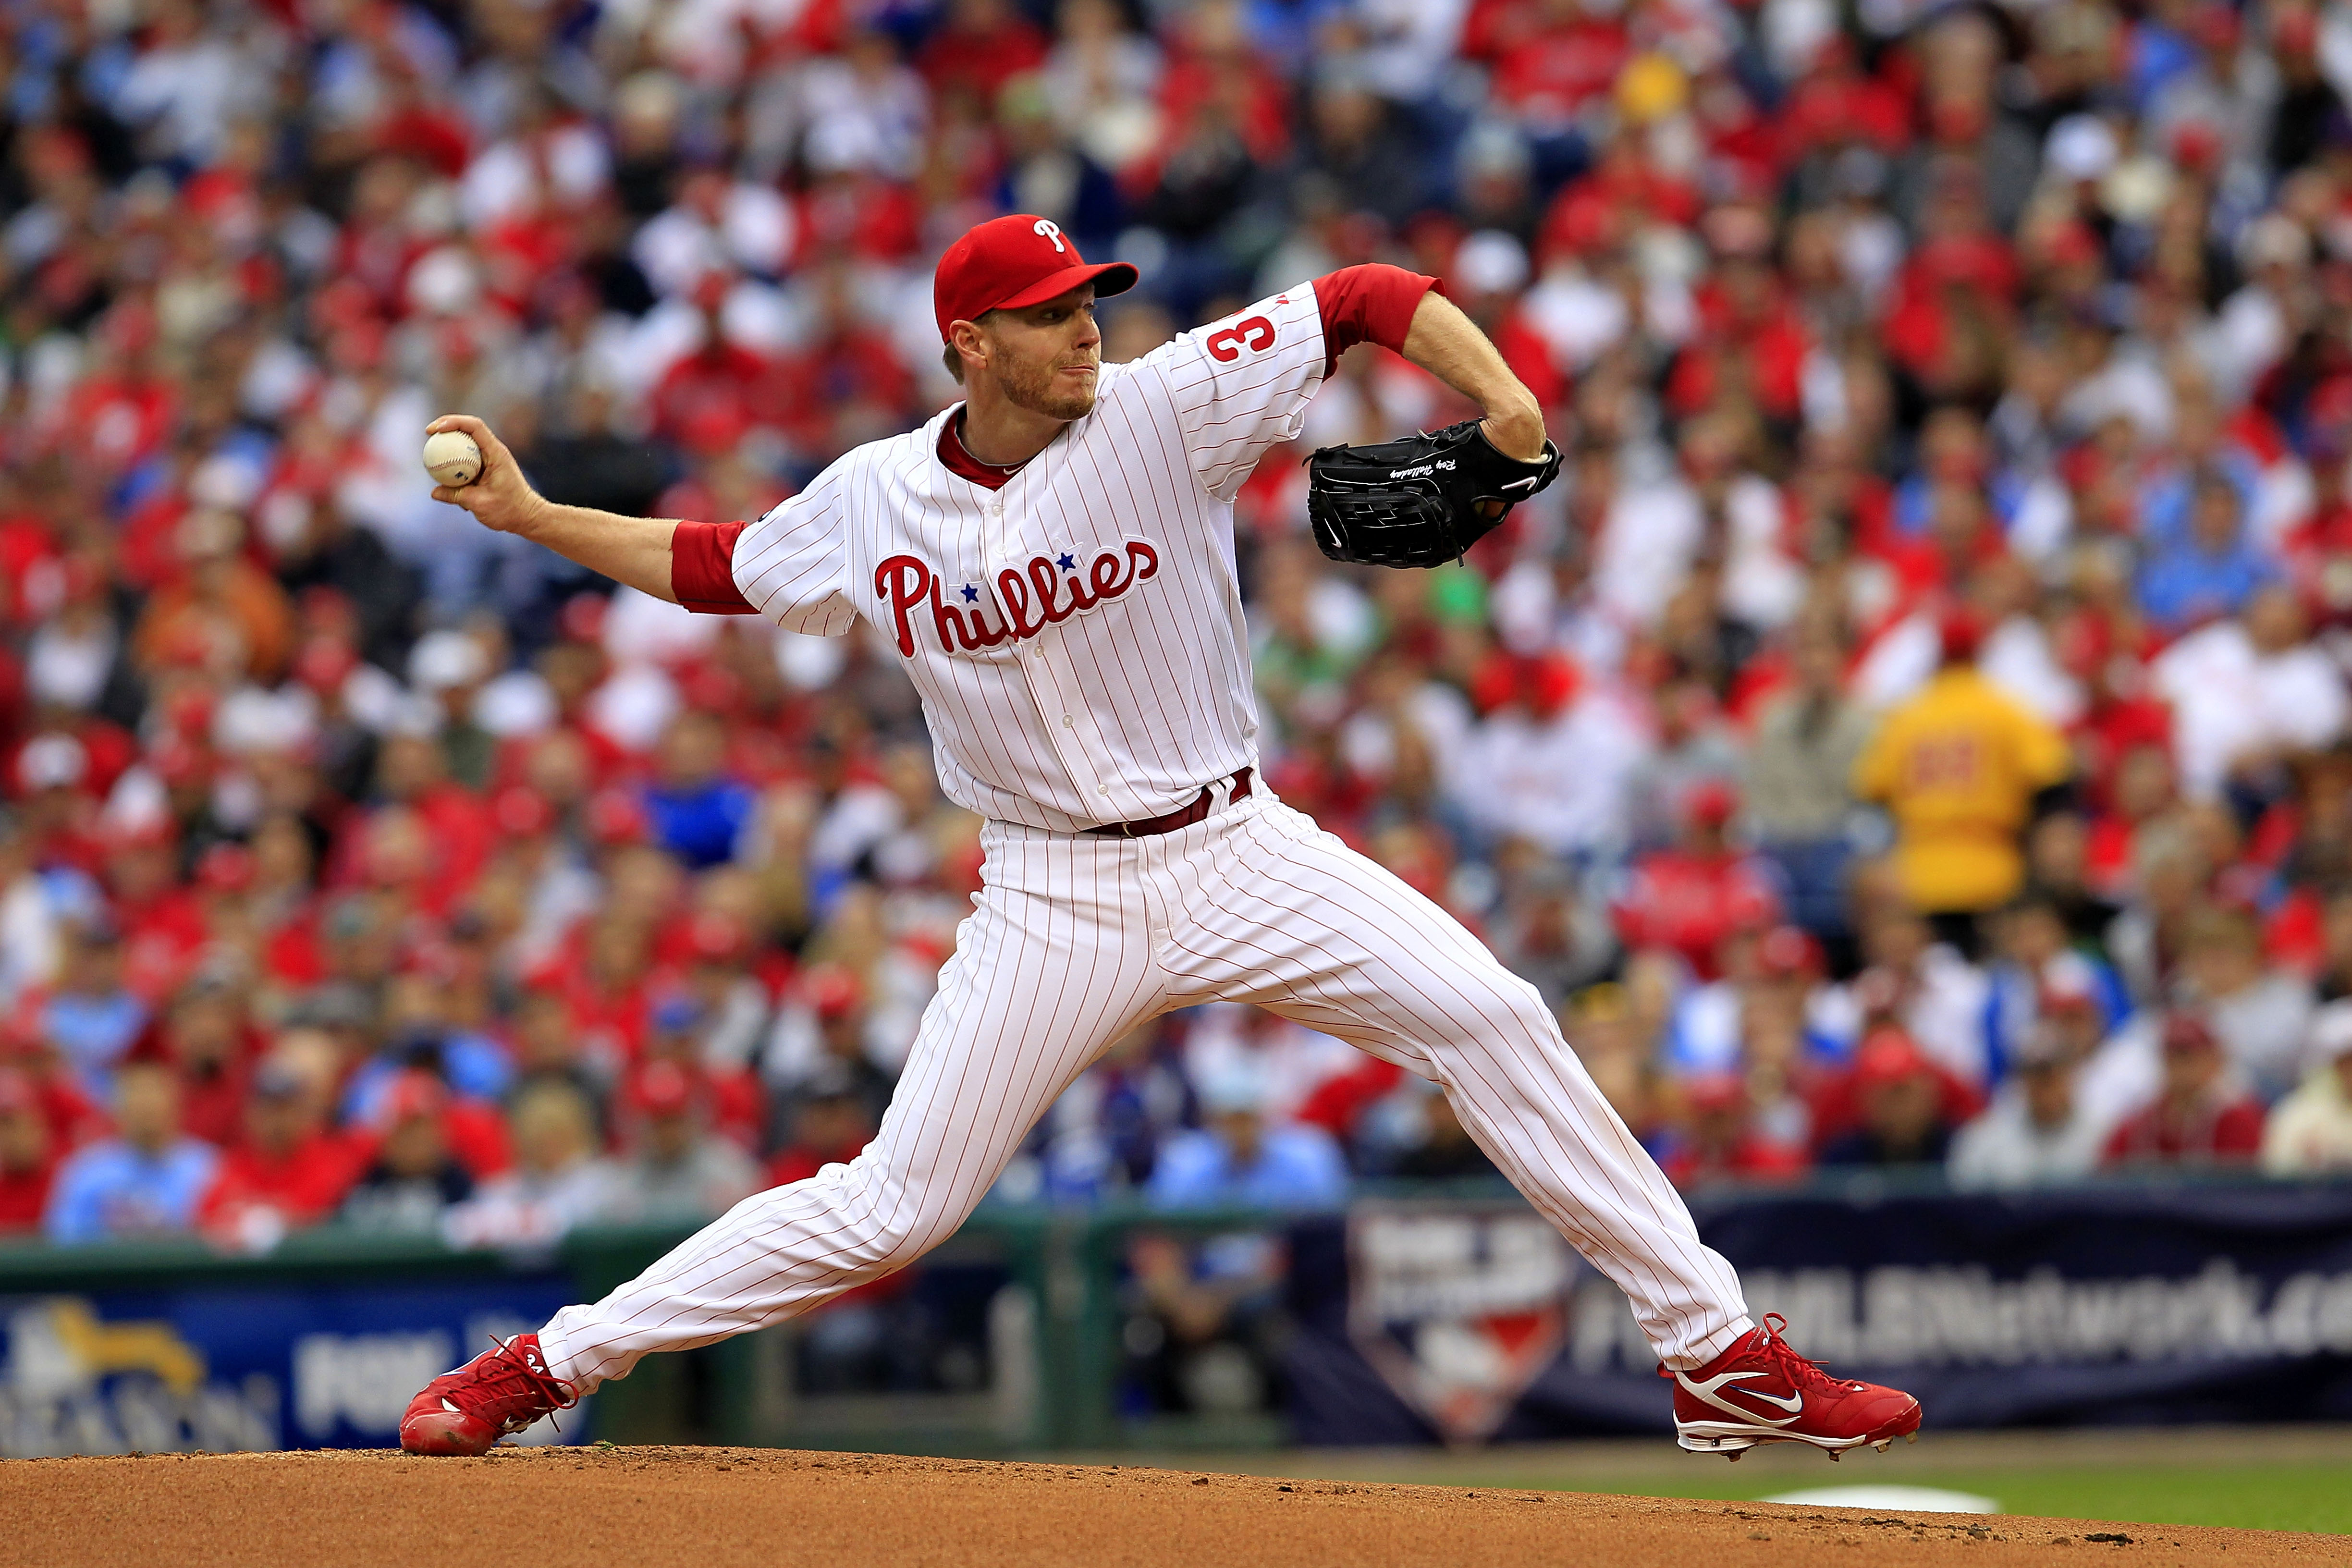 PHILADELPHIA - OCTOBER 06:  Roy Halladay #34 of the Philadelphia Phillies pitches during his no-hitter in Game 1 of the NLDS against the Cincinnati Reds at Citizens Bank Park on October 6, 2010 in Philadelphia, Pennsylvania.The Phillies defeated the Reds